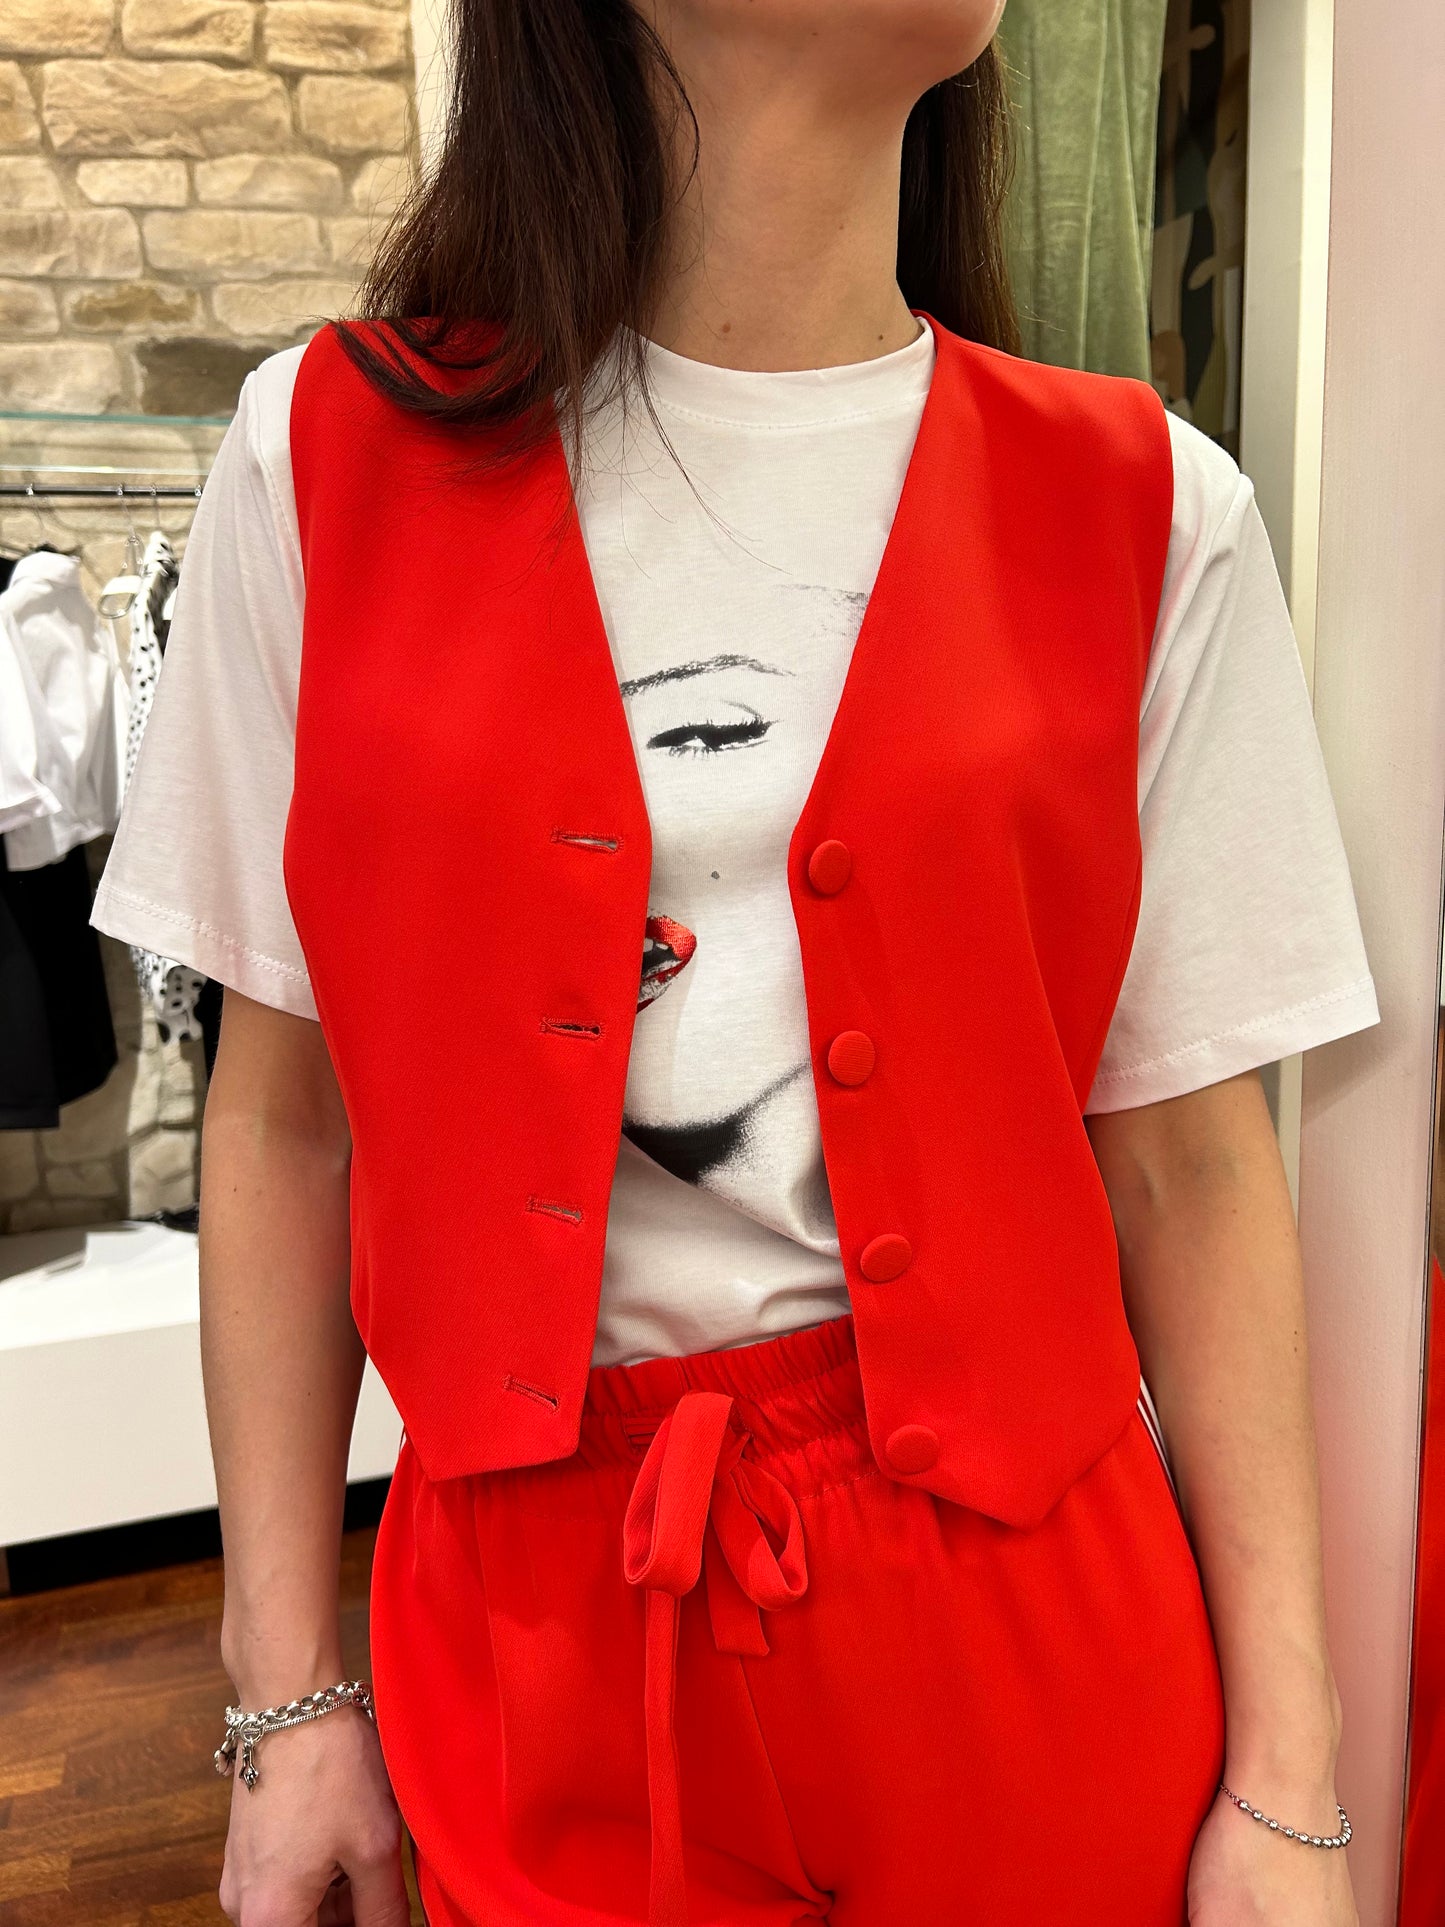 Tensione In gilet rosso